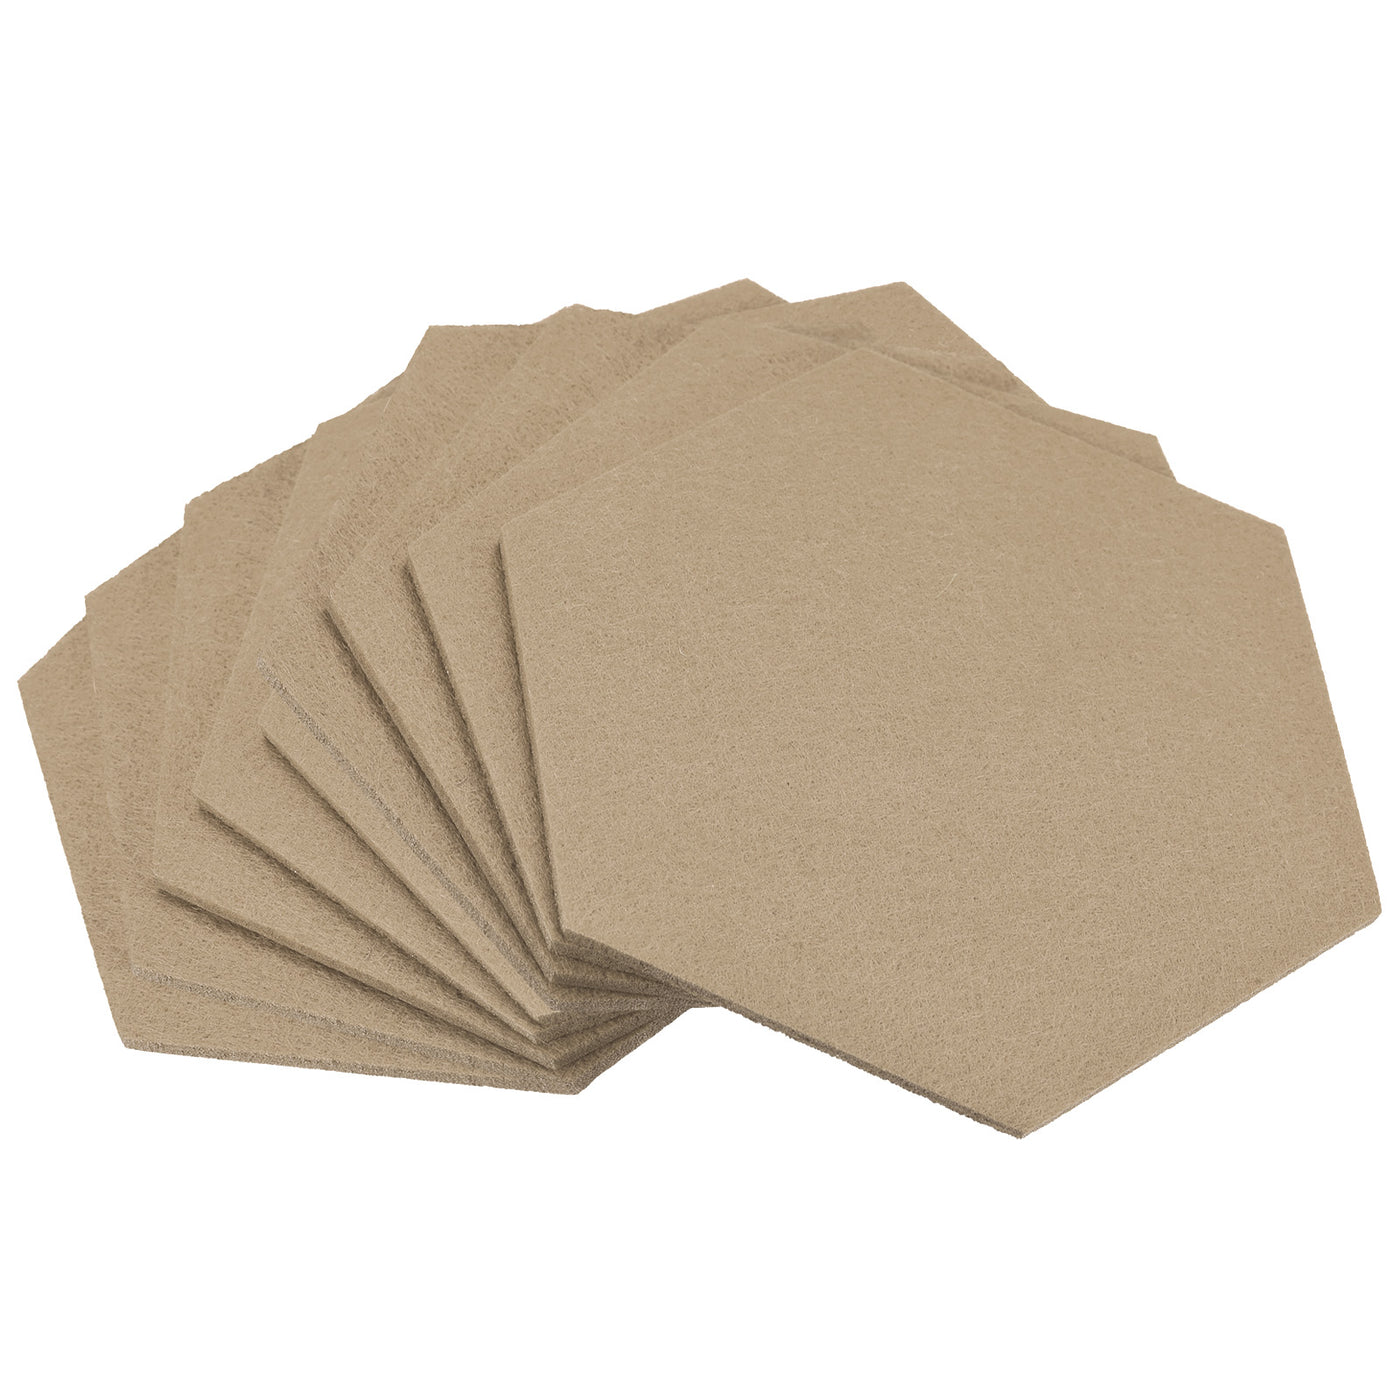 uxcell Uxcell Felt Coasters 9pcs Absorbent Pad Coaster for Drink Cup Pot Bowl Vase Beige